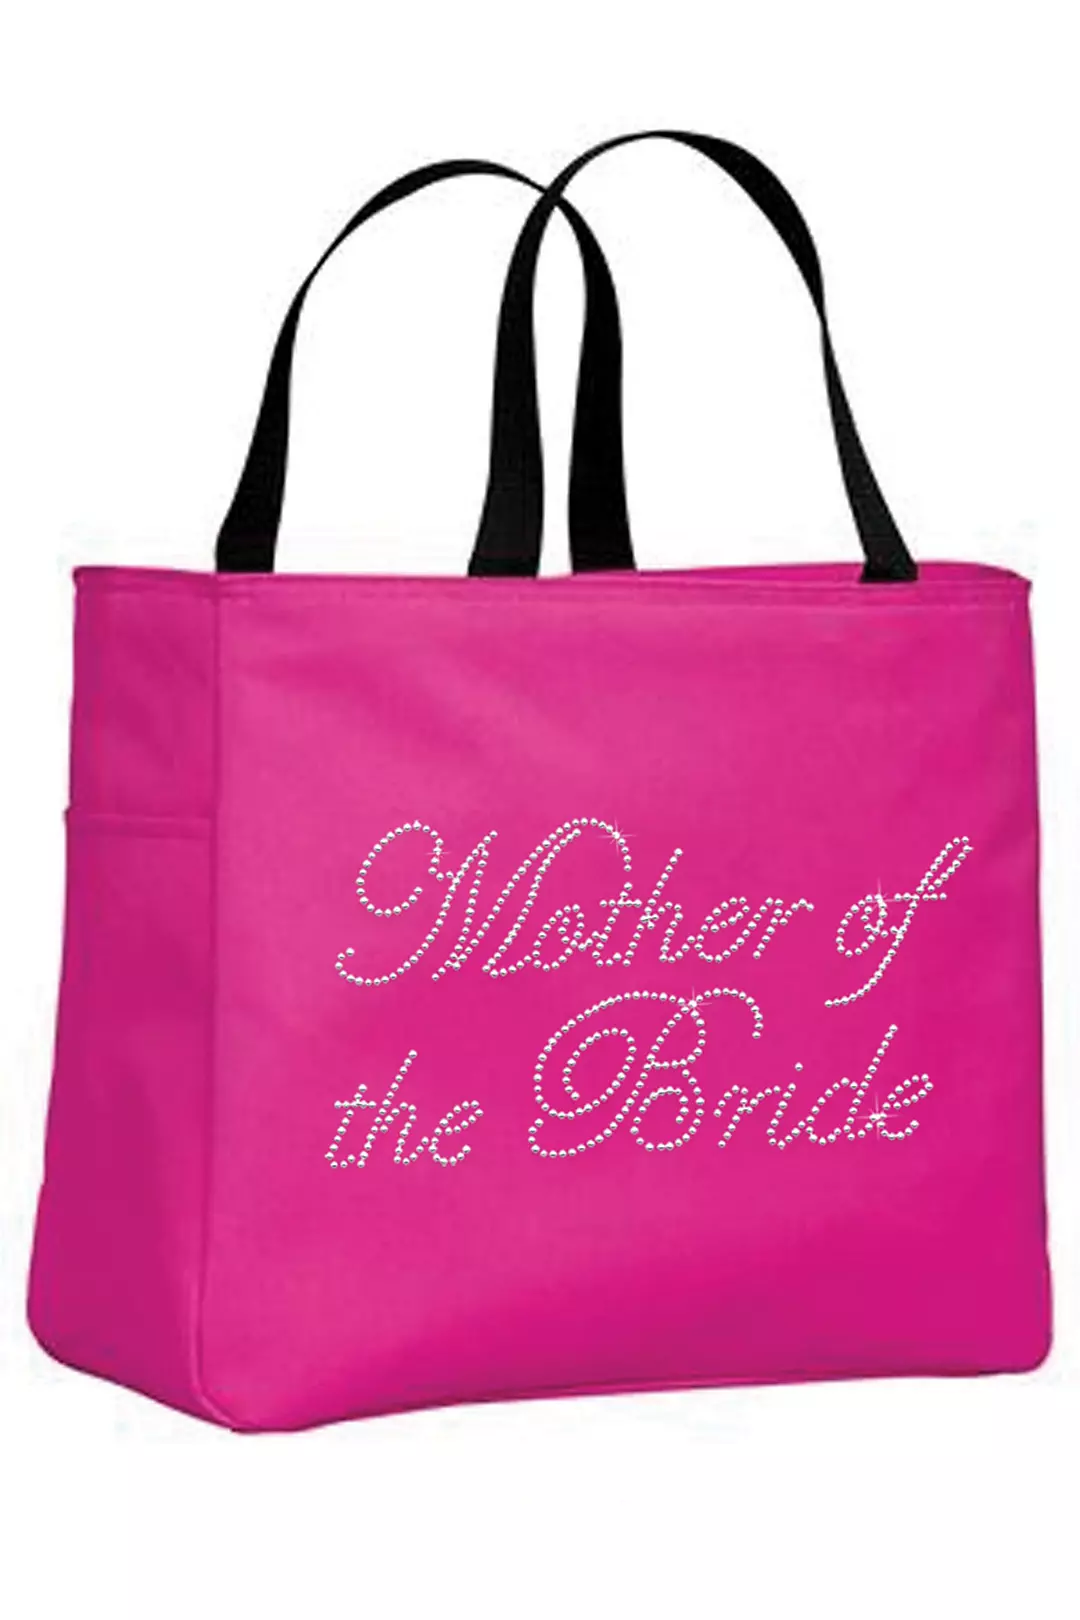 Rhinestone Mother of the Bride Tote Bag Image